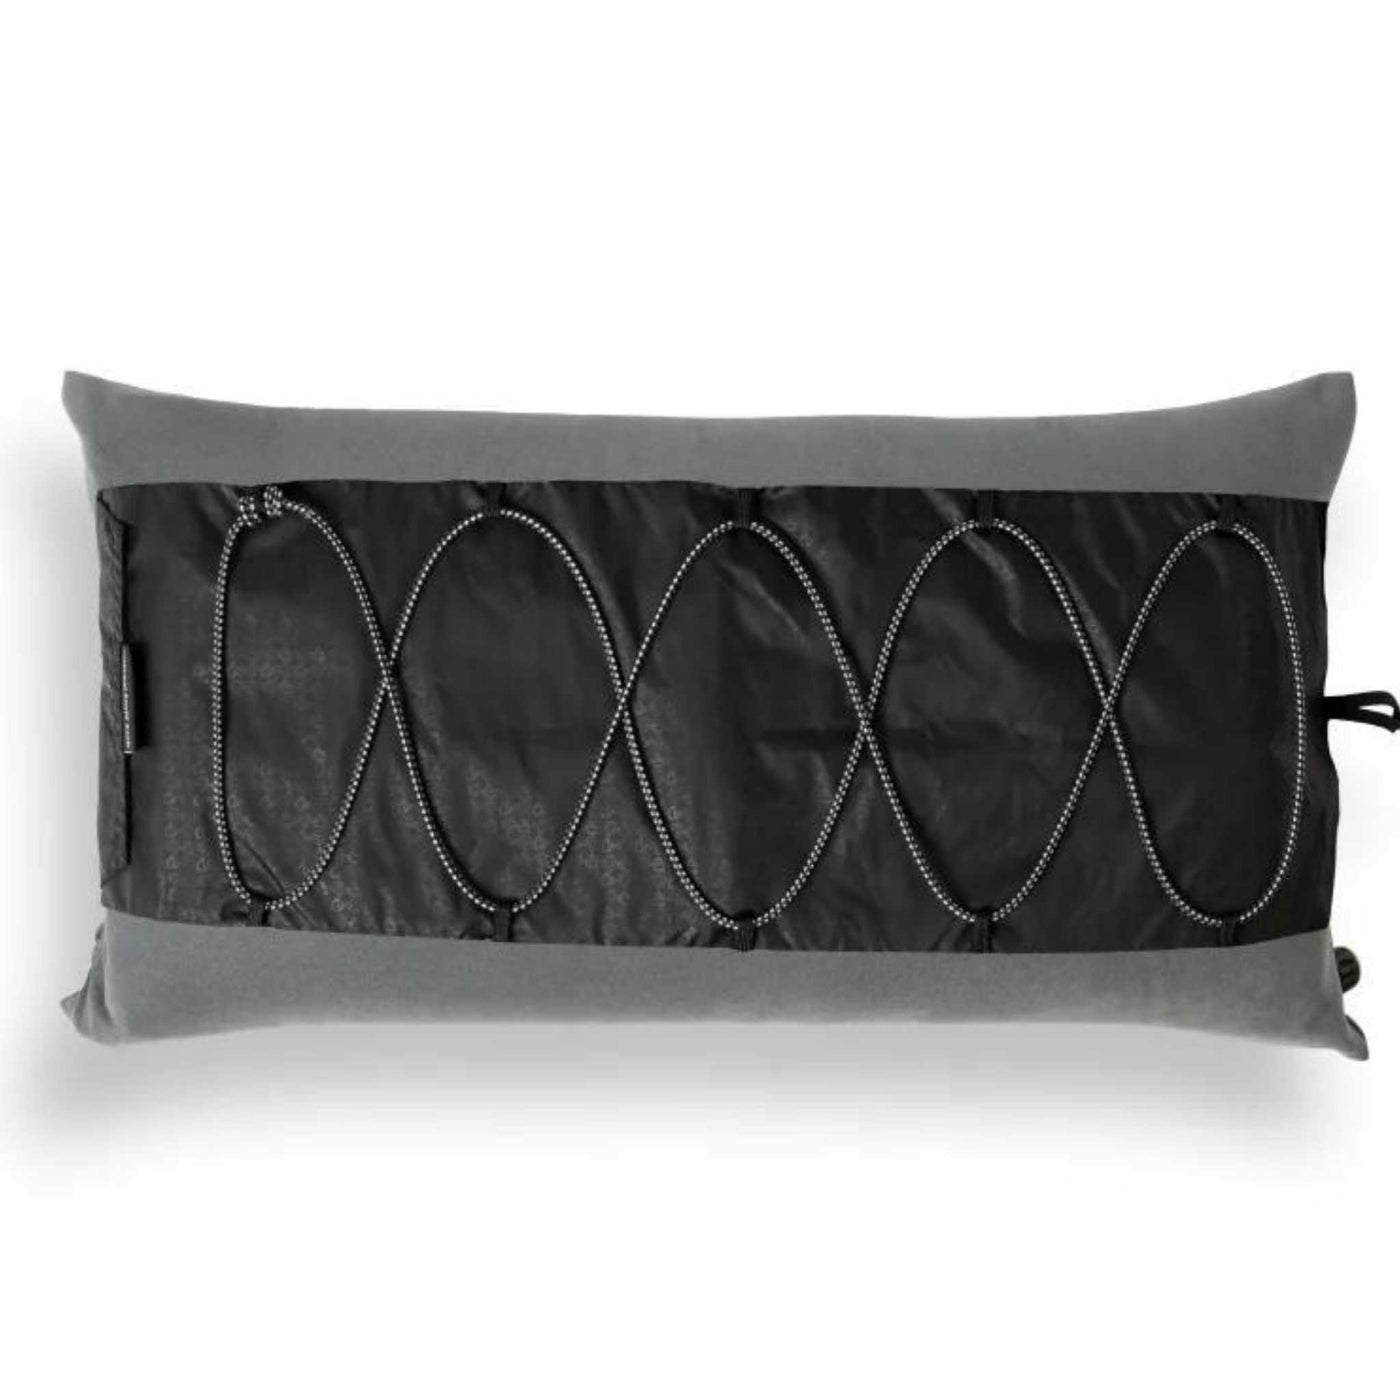 Nemo Fillo Luxury Camping Pillow | Camping Pillows and Accessories | Nemo NZ | Further Faster Christchurch NZ #goodnight-grey